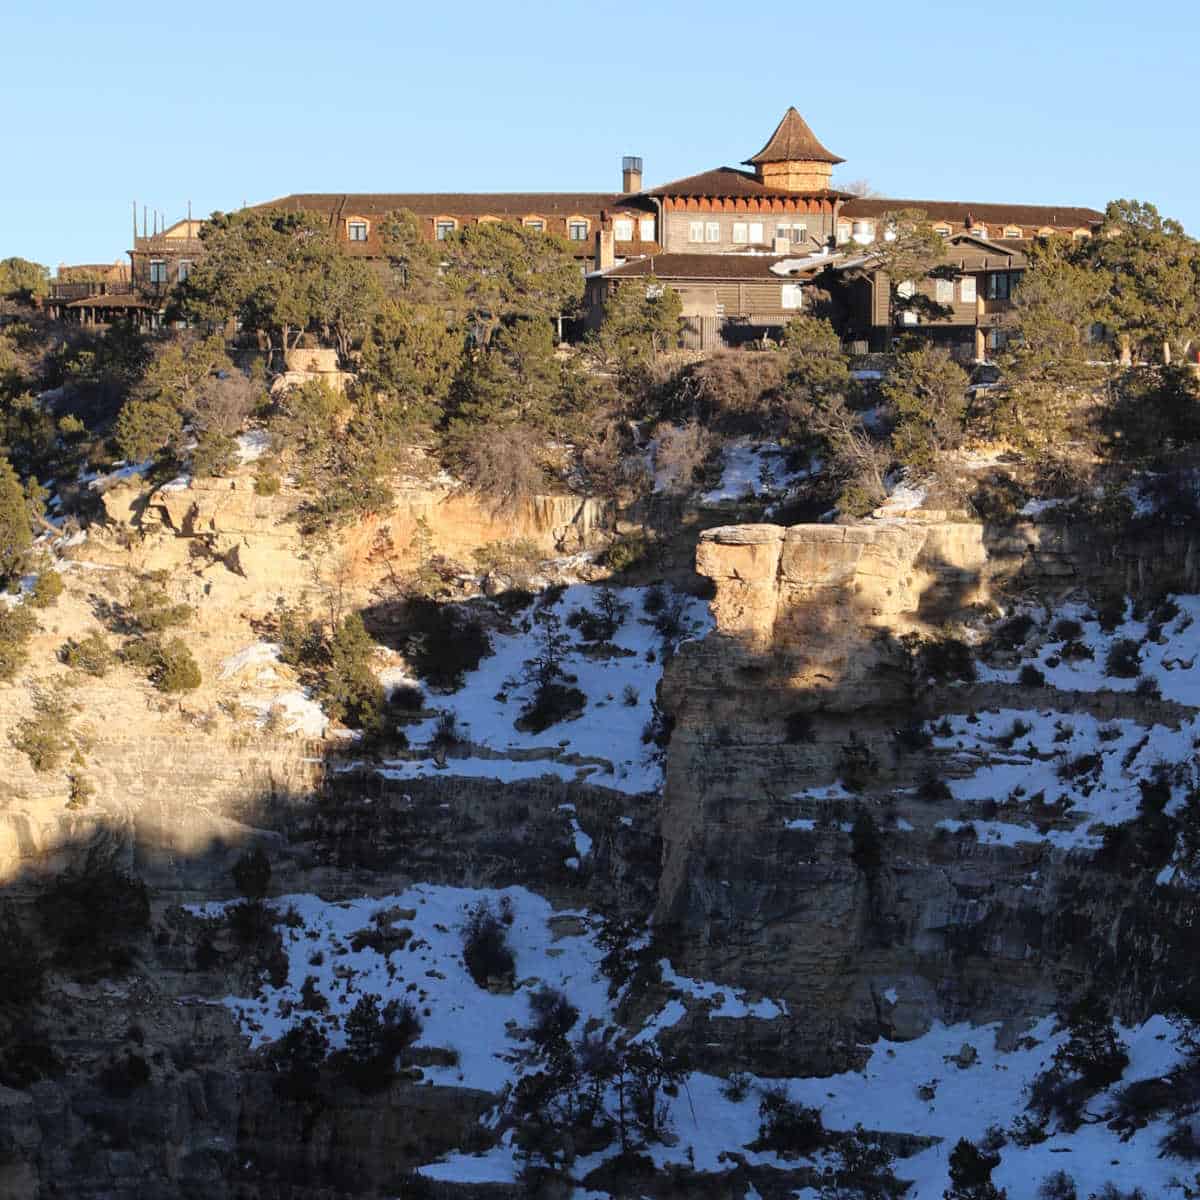 El Tovar Hotel perched on the South Rim of the Grand Canyon